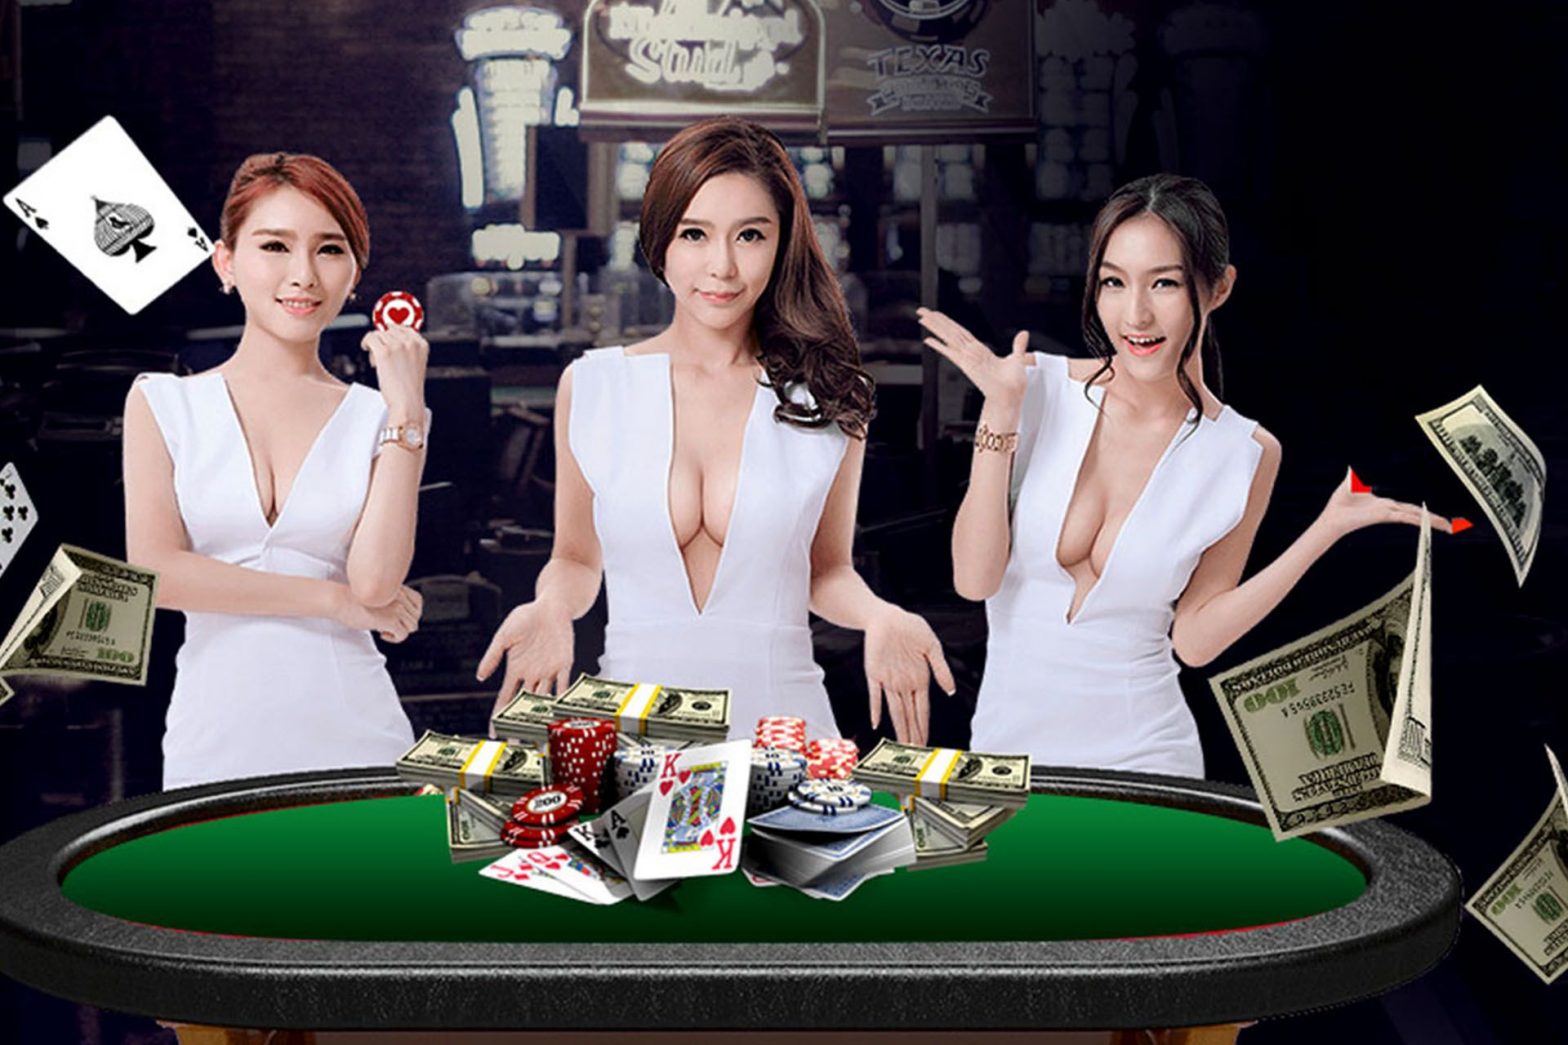 Bwin: not only sports betting